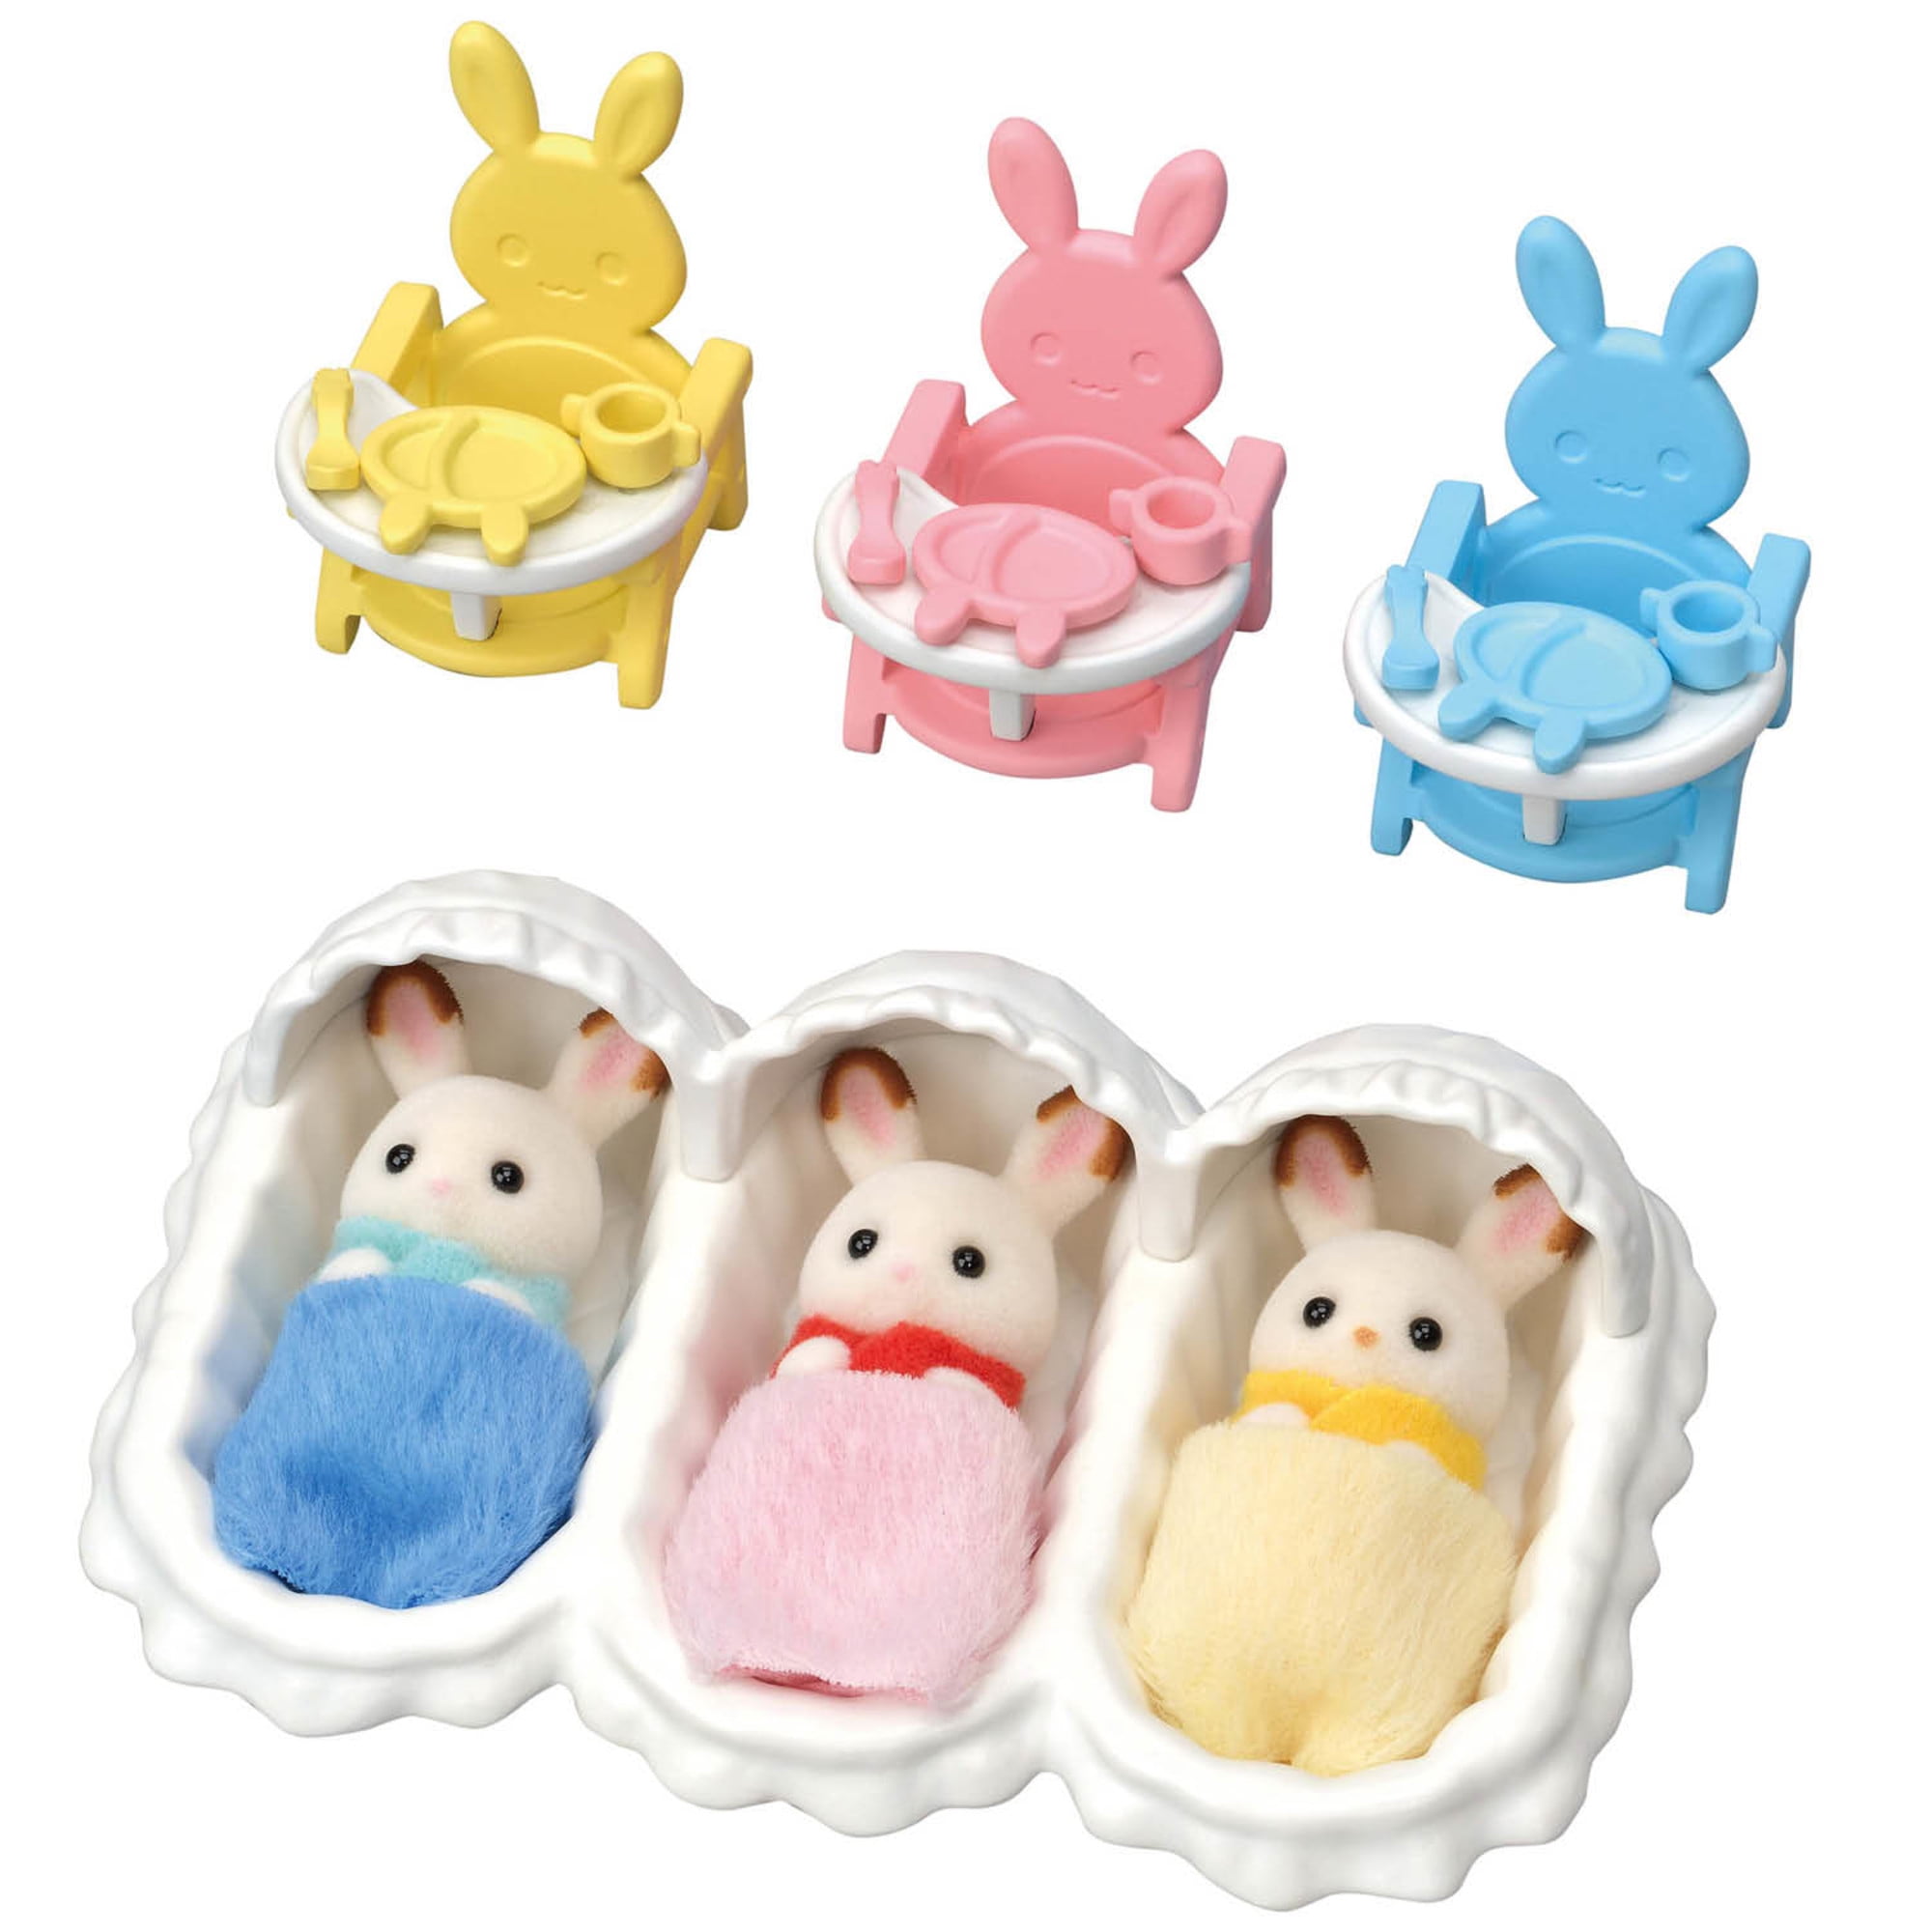 Details about   Calico Critters Triplets Care Set Dollhouse Playset with 3 Hopscotch Rabbit F... 